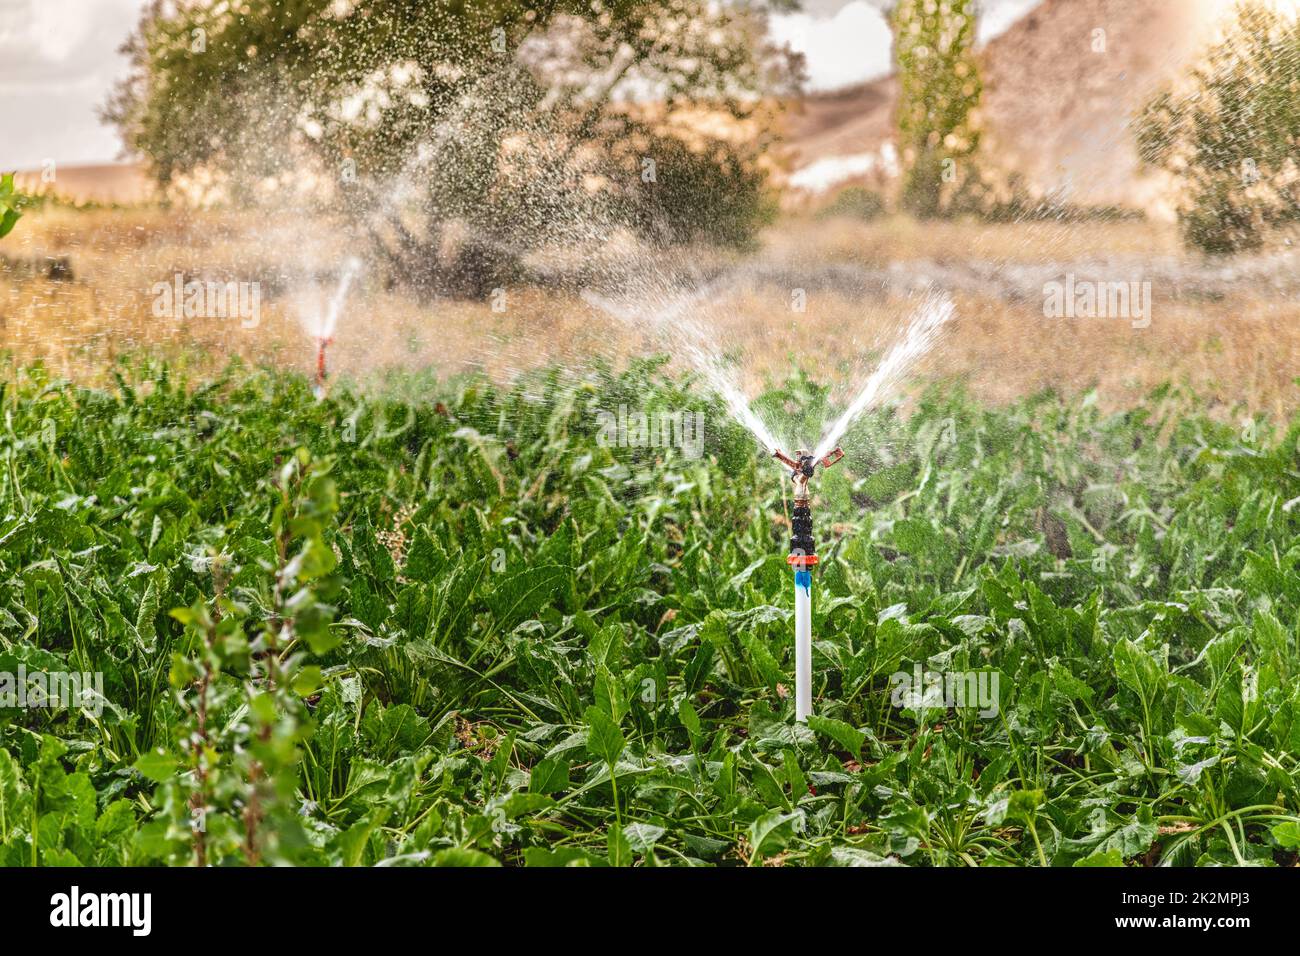 Automatic Sprinkler irrigation system watering in the vegetable farm Stock Photo